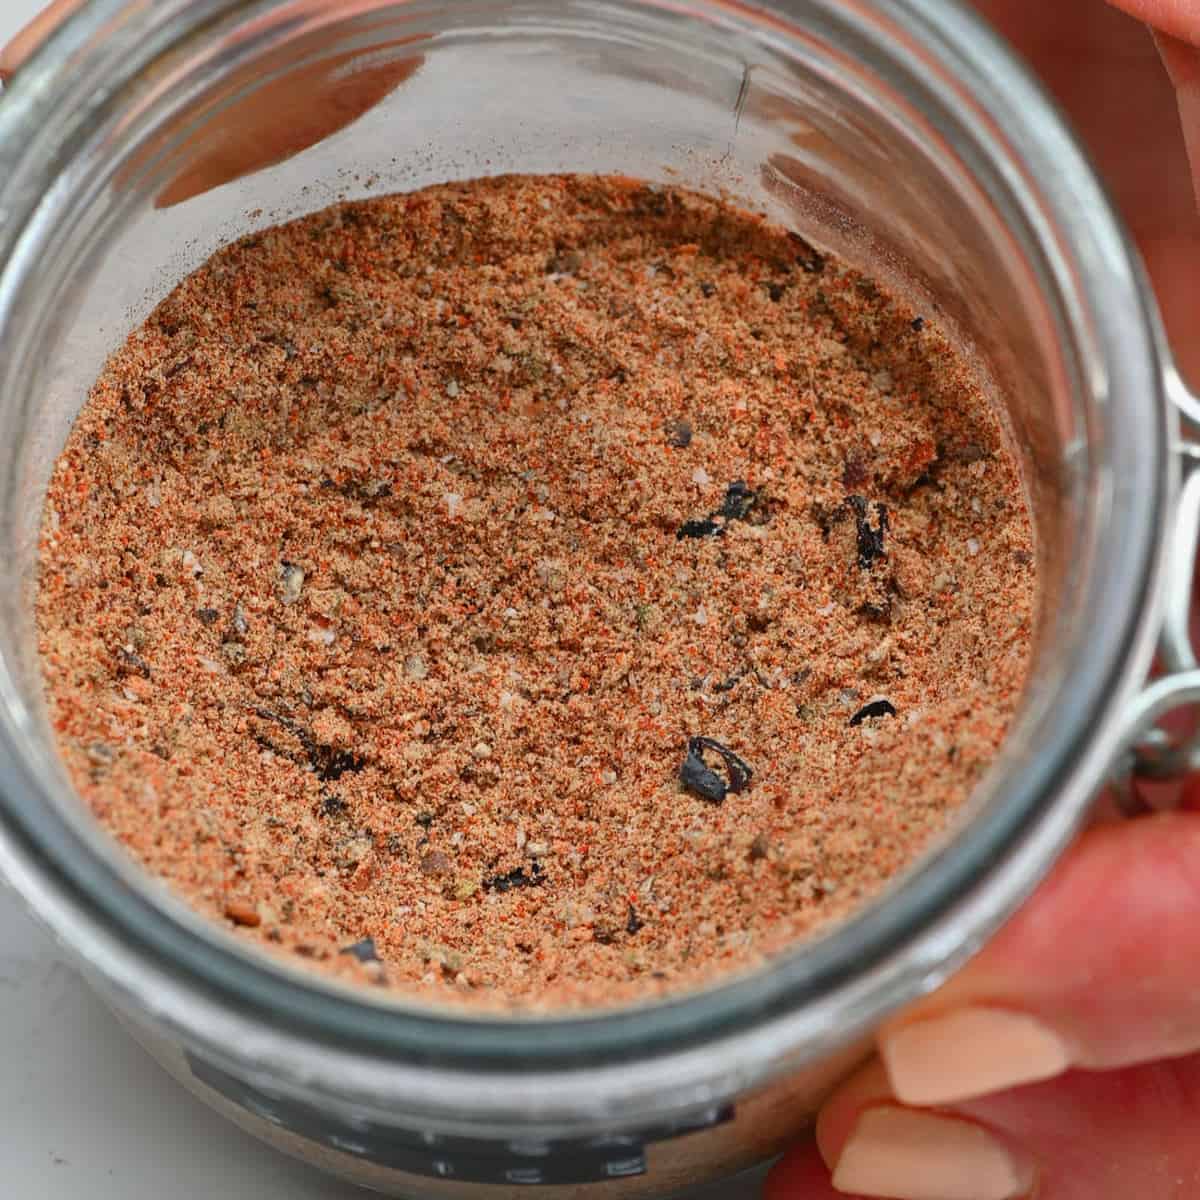 https://www.alphafoodie.com/wp-content/uploads/2021/04/mexican-spice-blend-1-of-1-1.jpeg